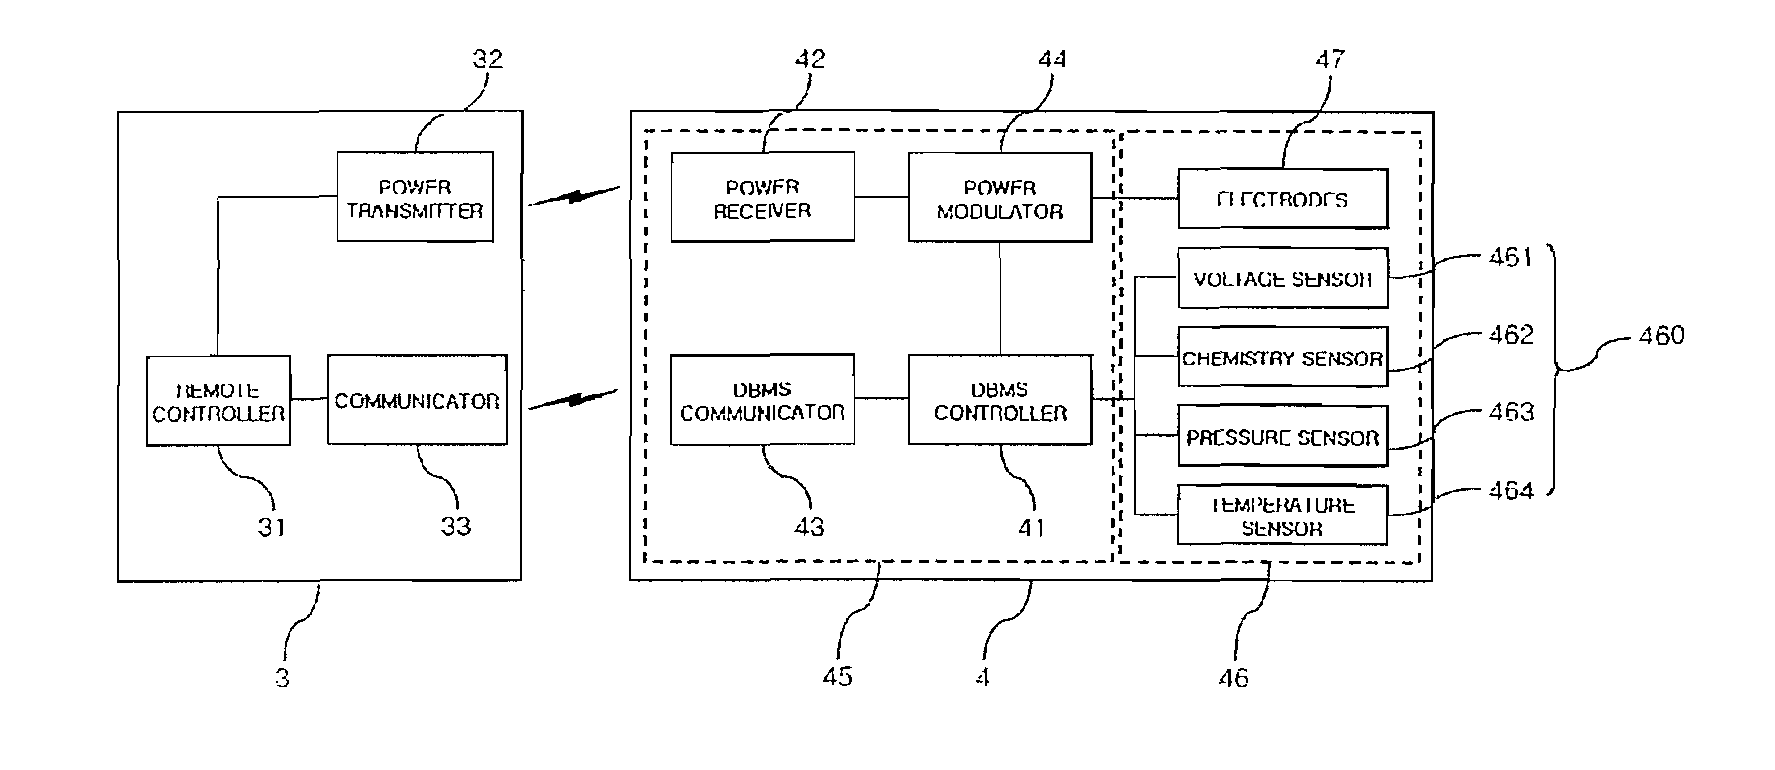 Neural Electronic Interface Device For Motor And Sensory Controls of Human Body